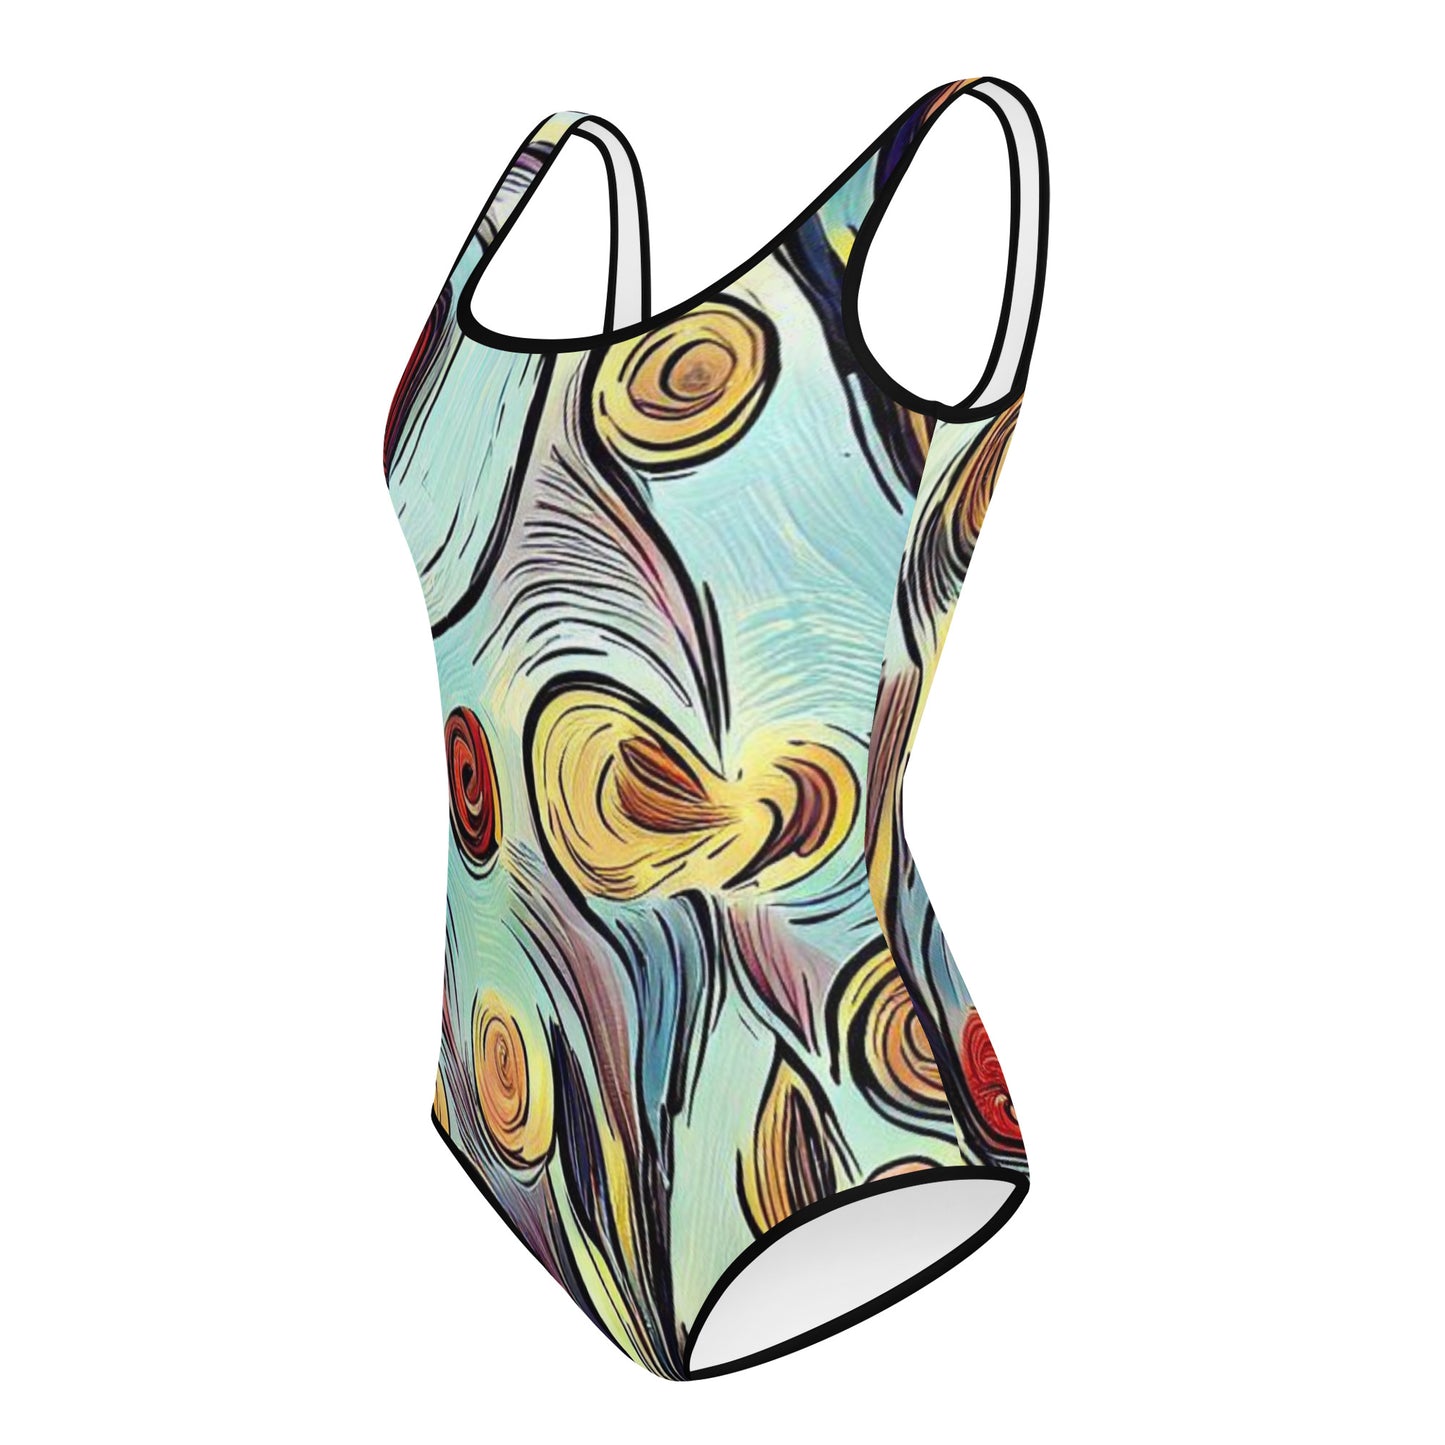 Impressionistic Bloom Youth Swimsuit